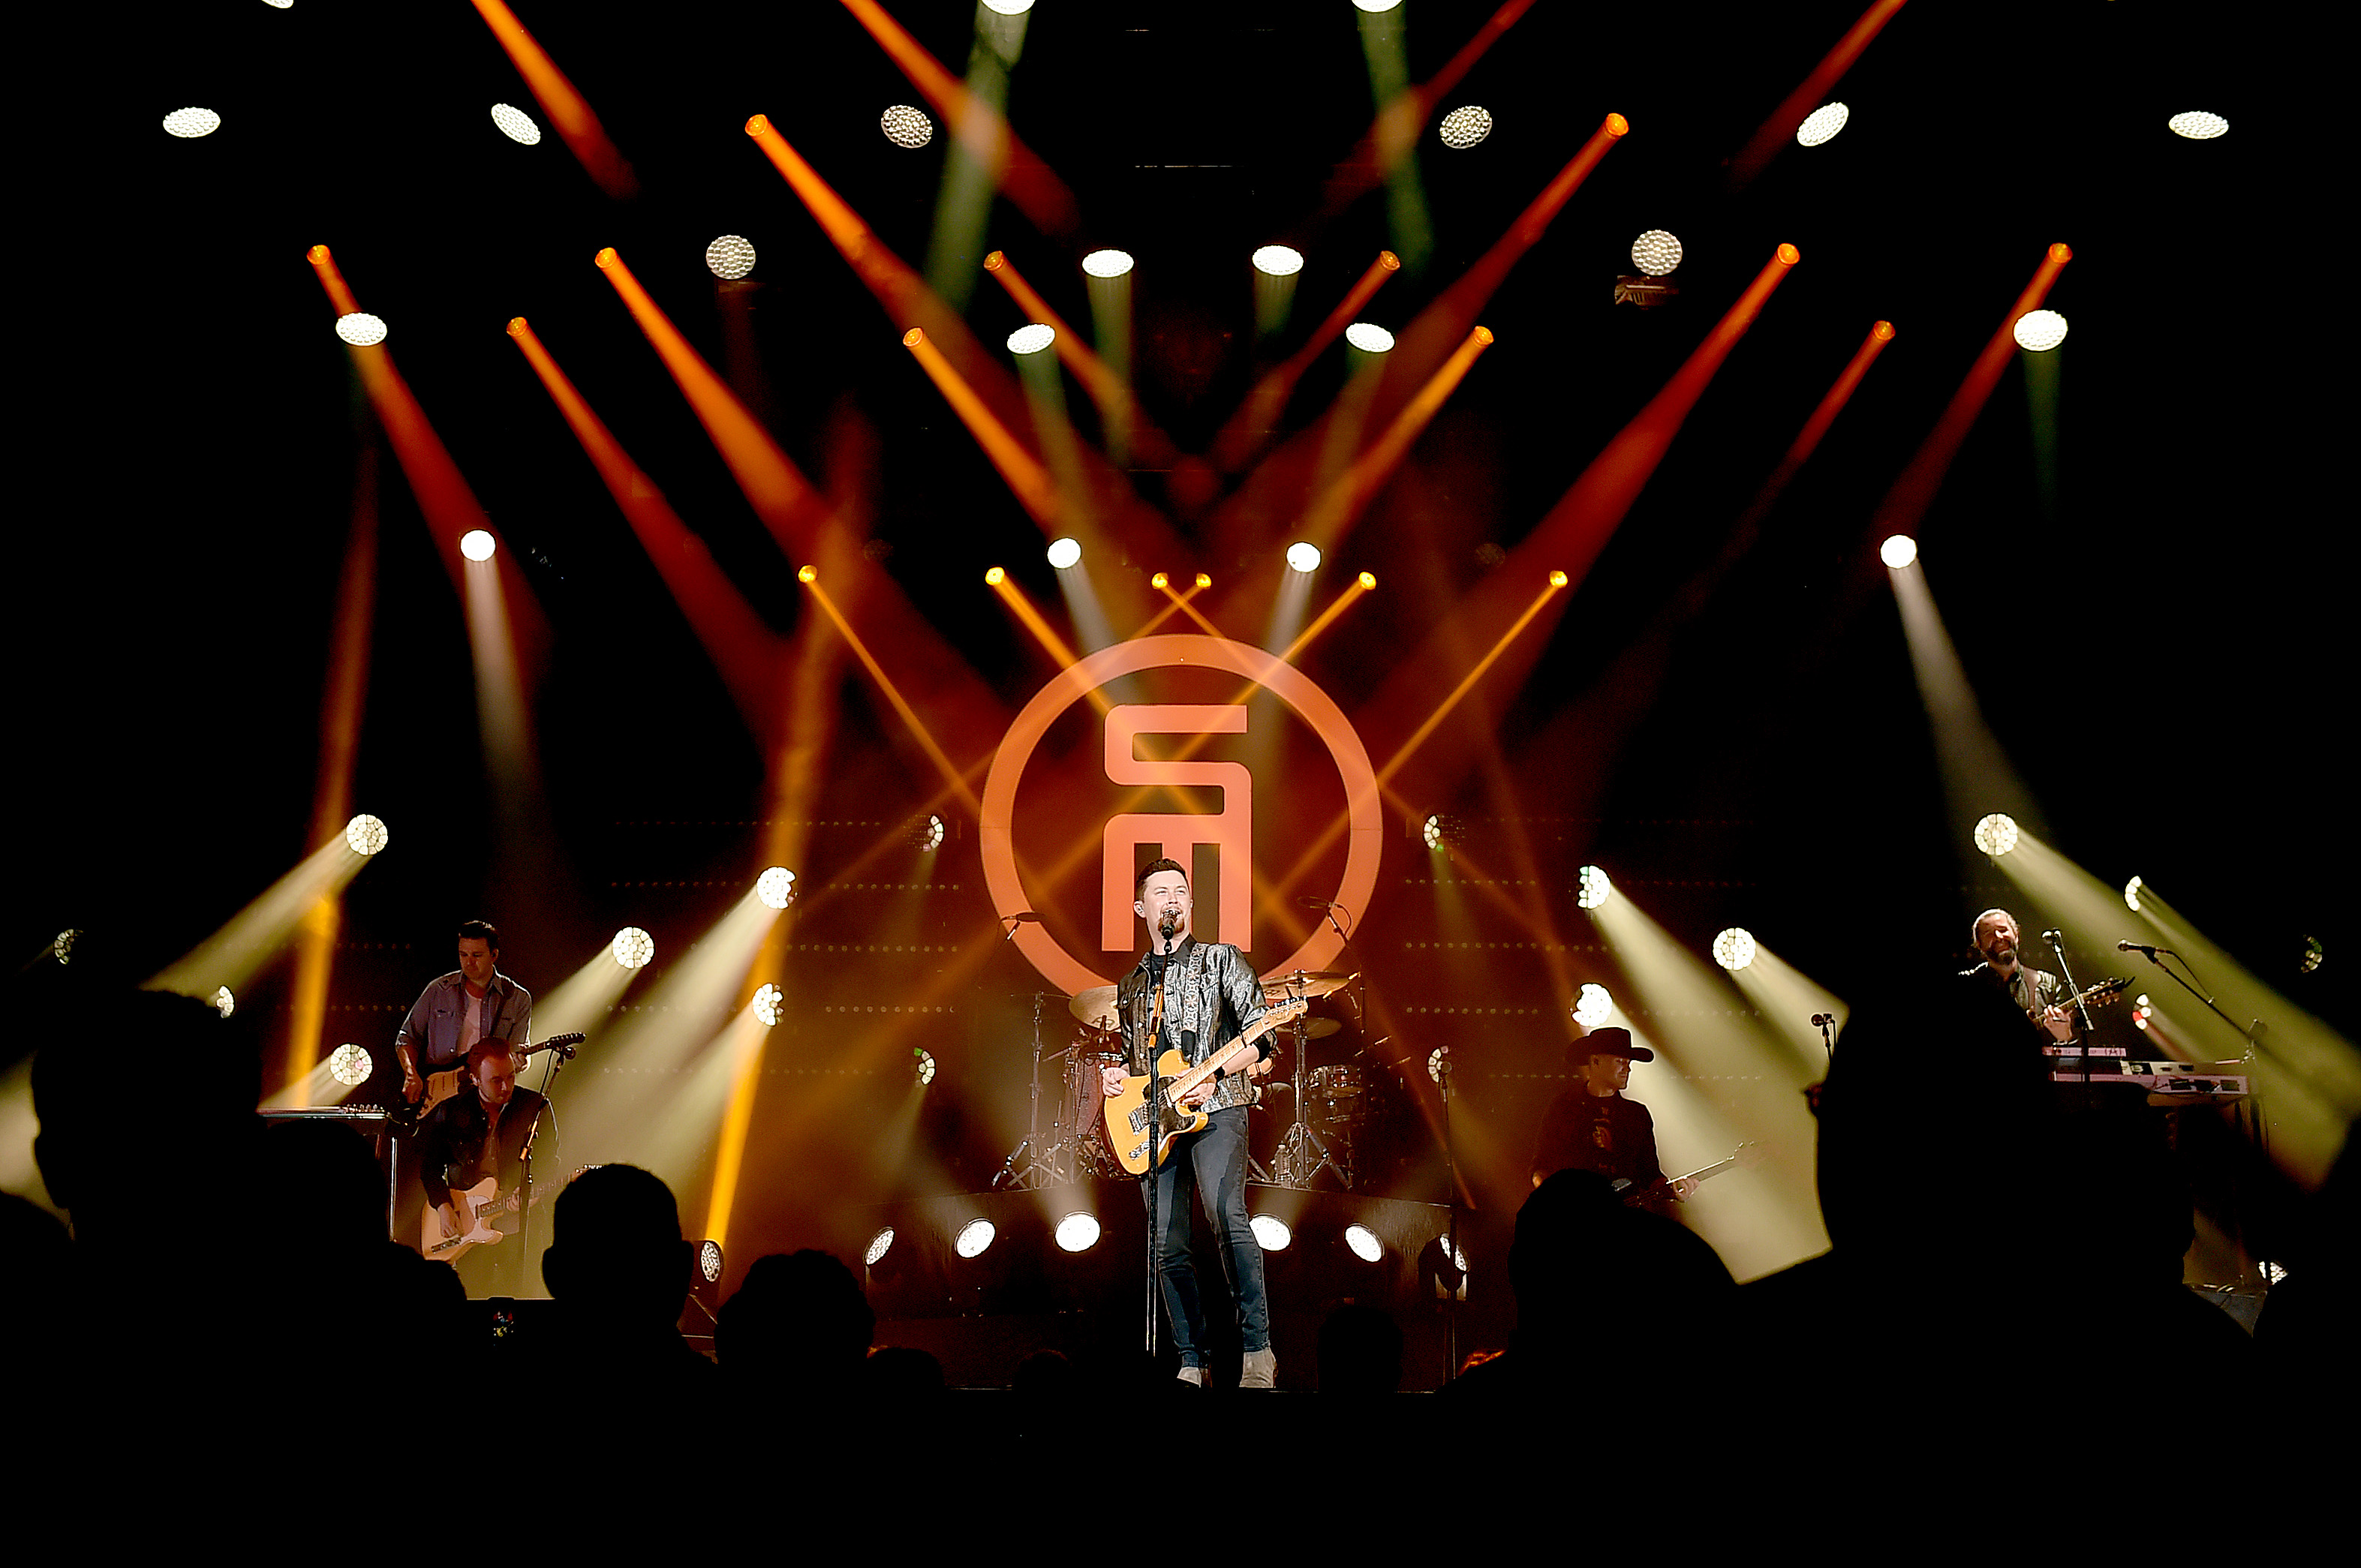 Scotty McCreery Brings Fans To Their Feet With New Tunes at the Historic Ryman Auditorium